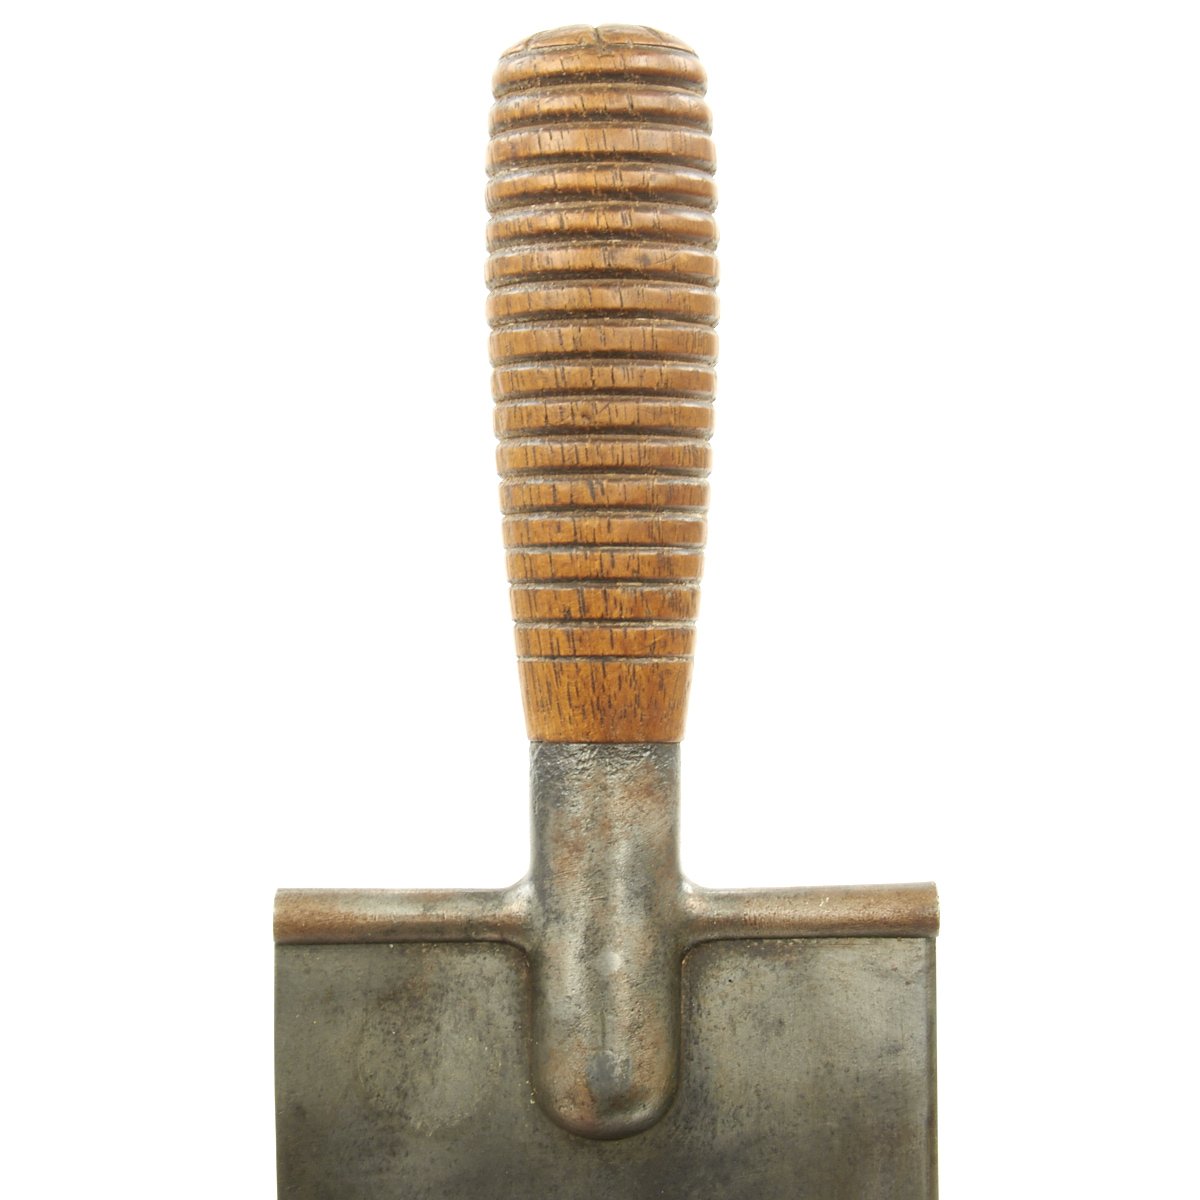 Original U.S. Army Model 1880 Entrenching Tool with Leather Sheath ...